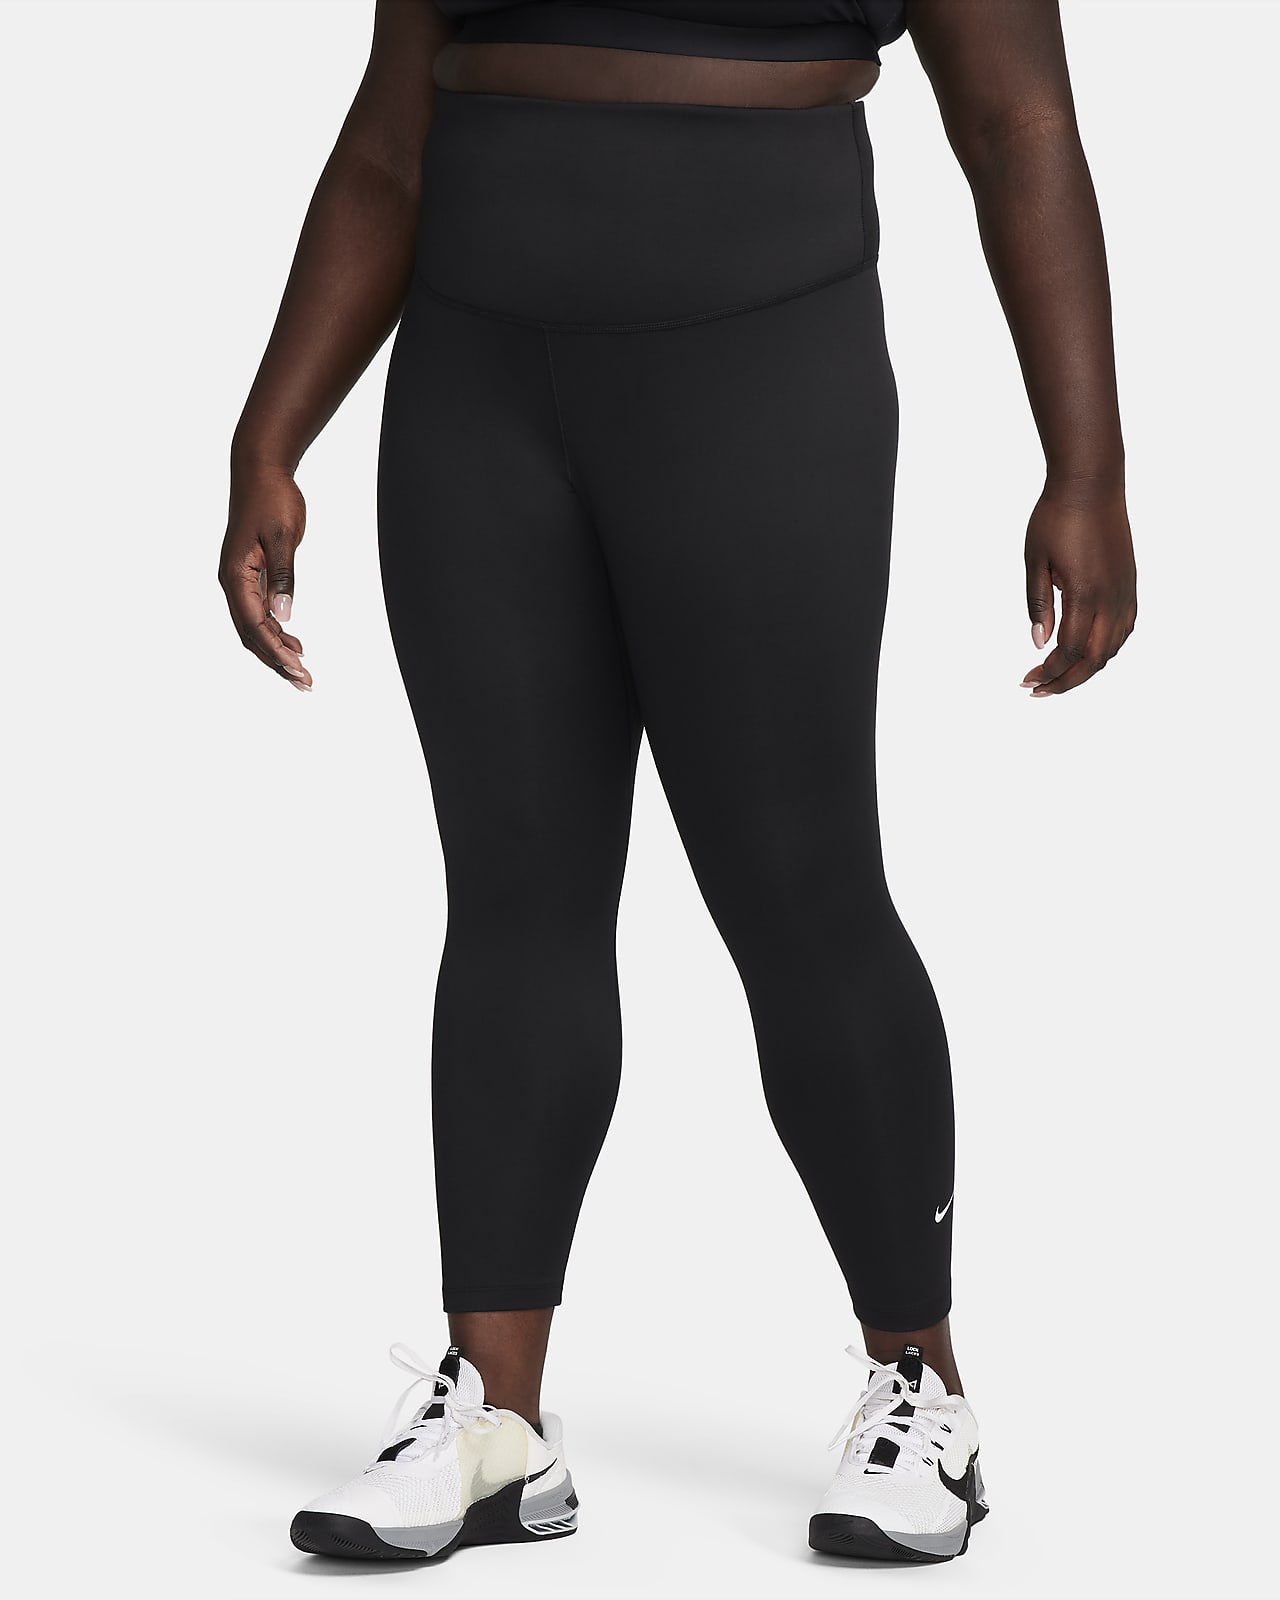 Therma-FIT One Women's 7/8 Leggings (Plus Size).